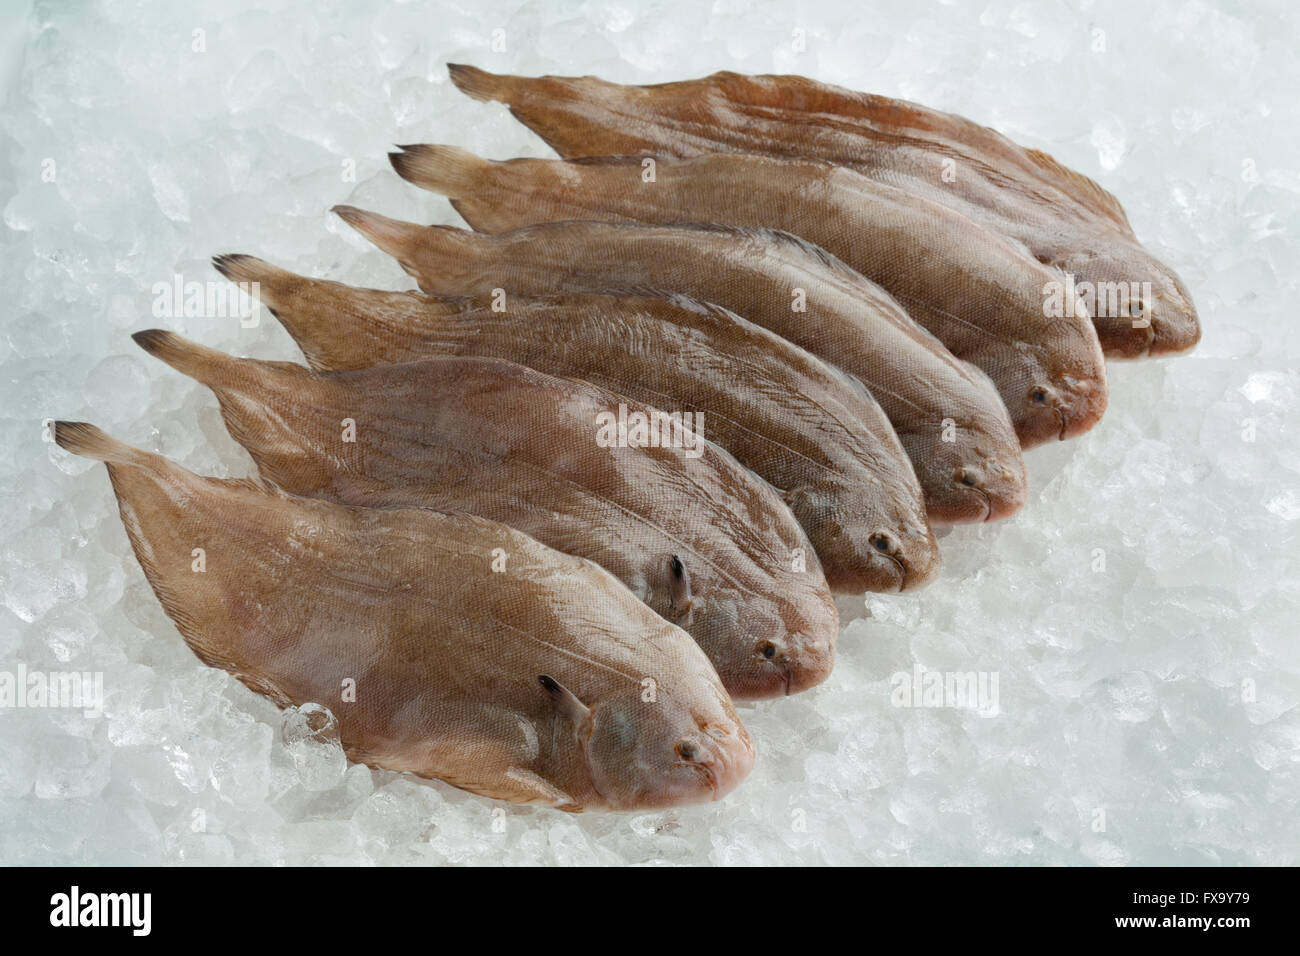 Fresh raw common sole fishes on ice Stock Photo